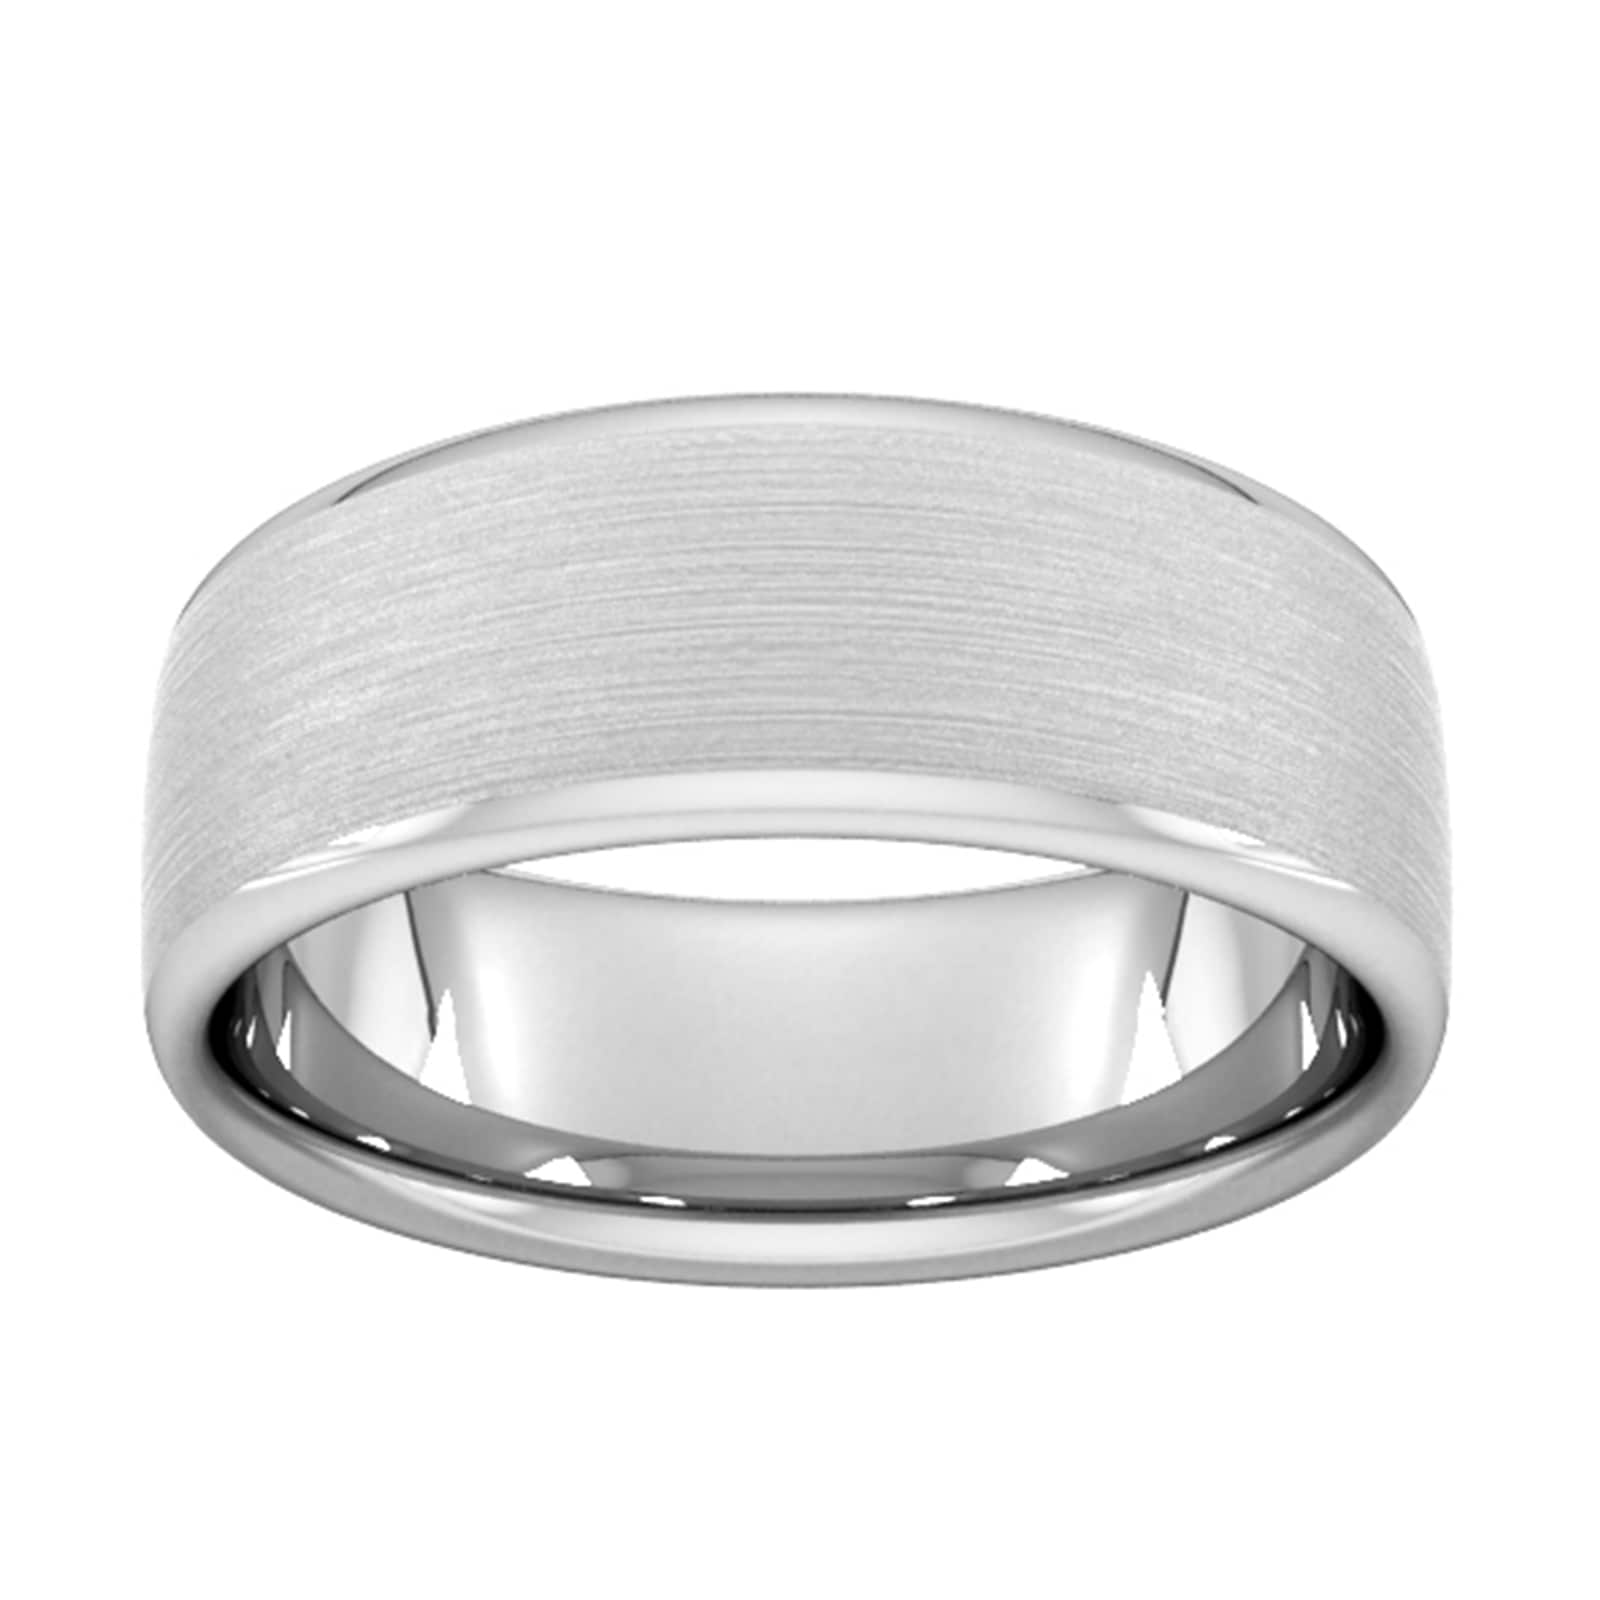 8mm Traditional Court Heavy Matt Finished Wedding Ring In 18 Carat White Gold - Ring Size K